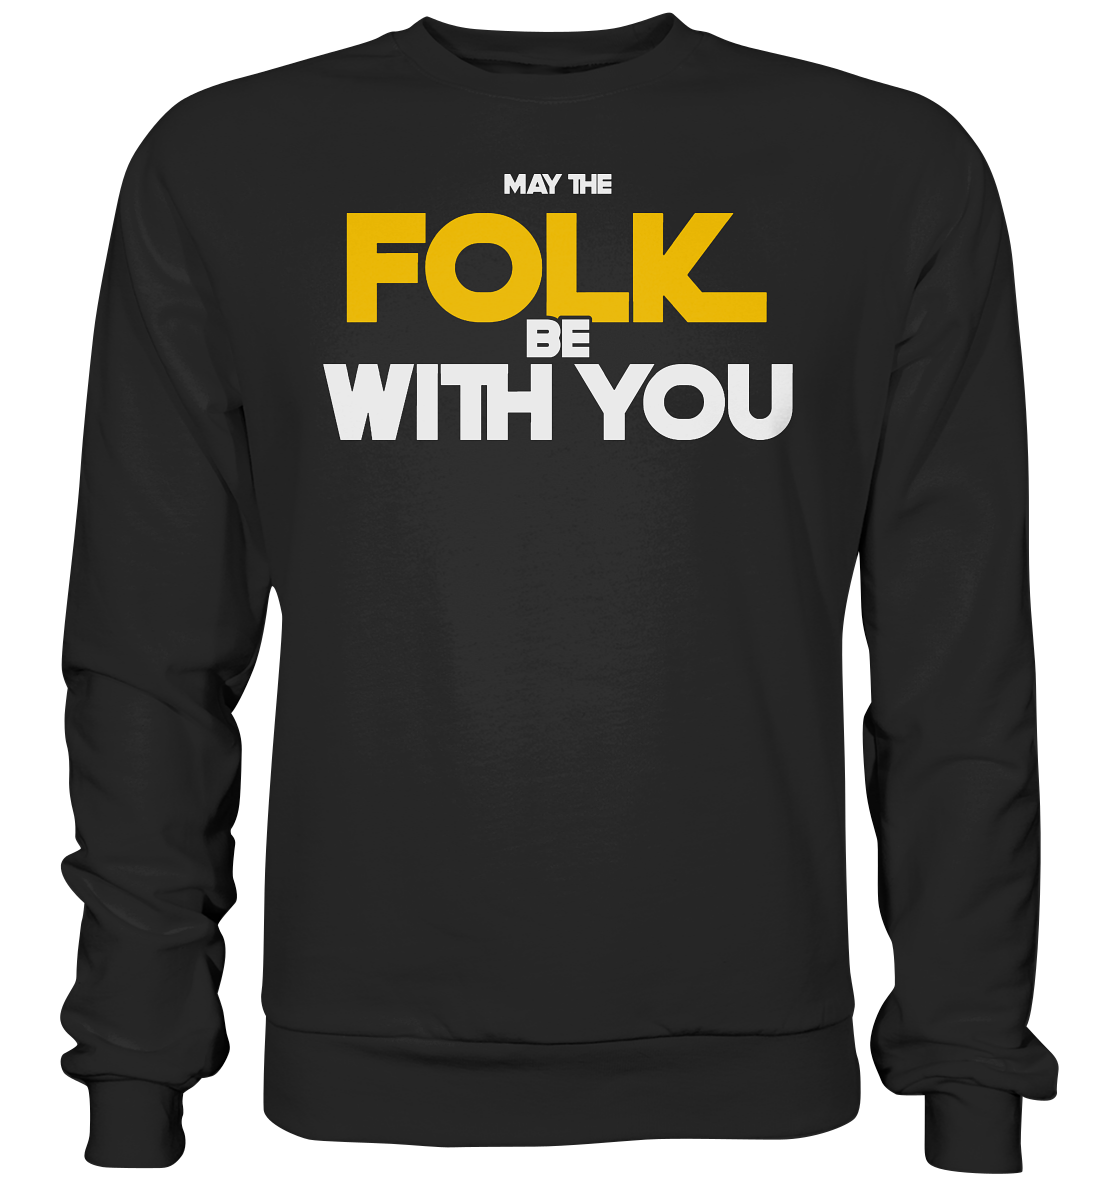 May The Folk Be With You - Premium Sweatshirt